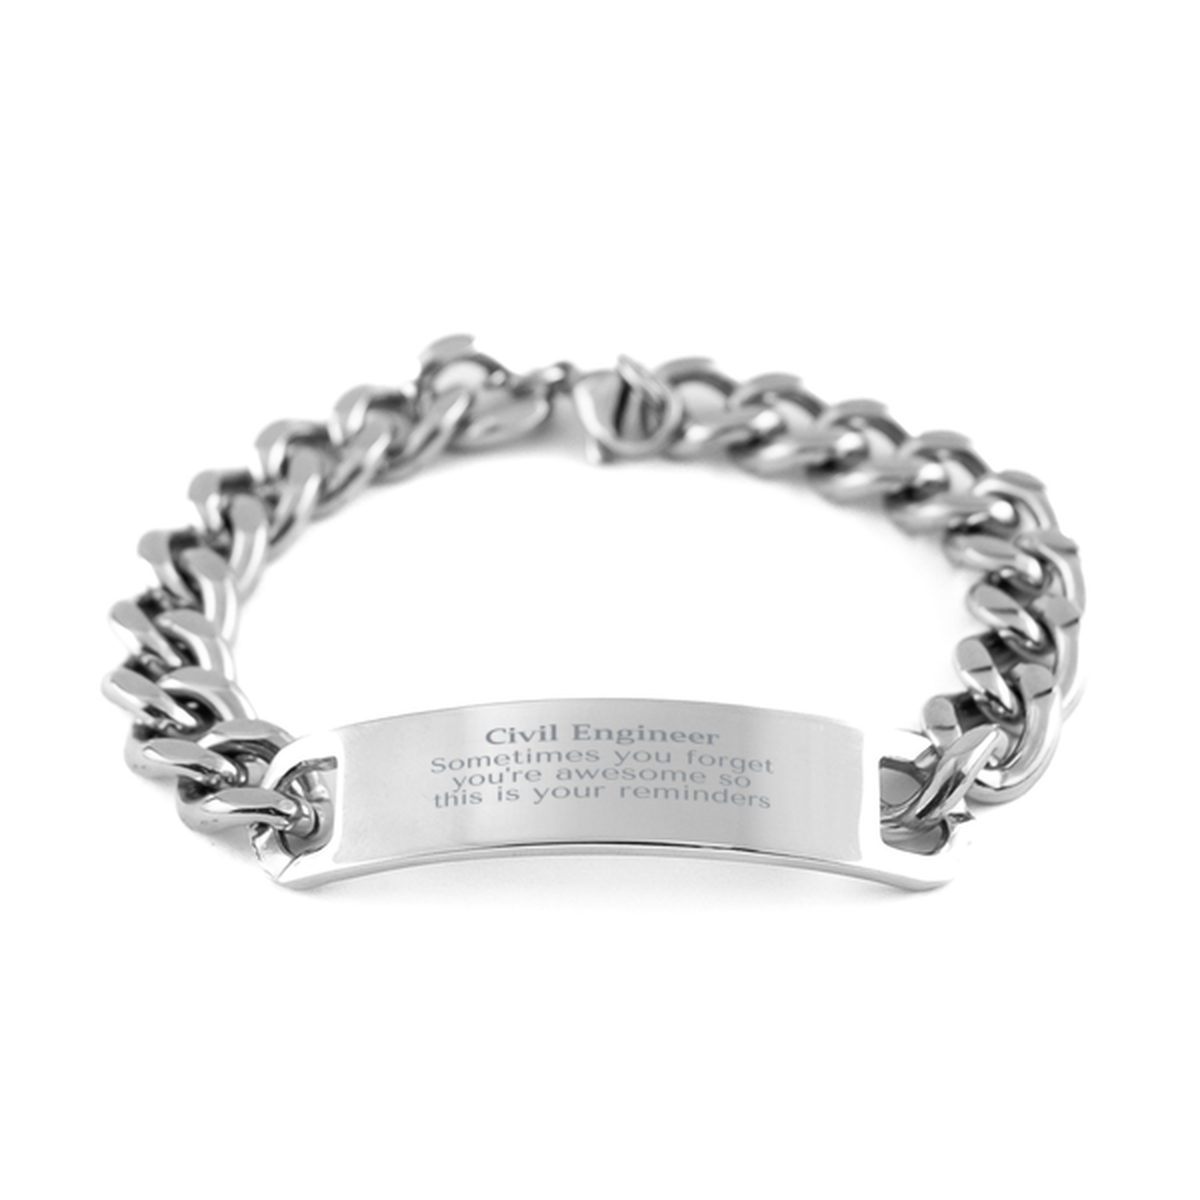 Sentimental Civil Engineer Cuban Chain Stainless Steel Bracelet, Civil Engineer Sometimes you forget you're awesome so this is your reminders, Graduation Christmas Birthday Gifts for Civil Engineer, Men, Women, Coworkers